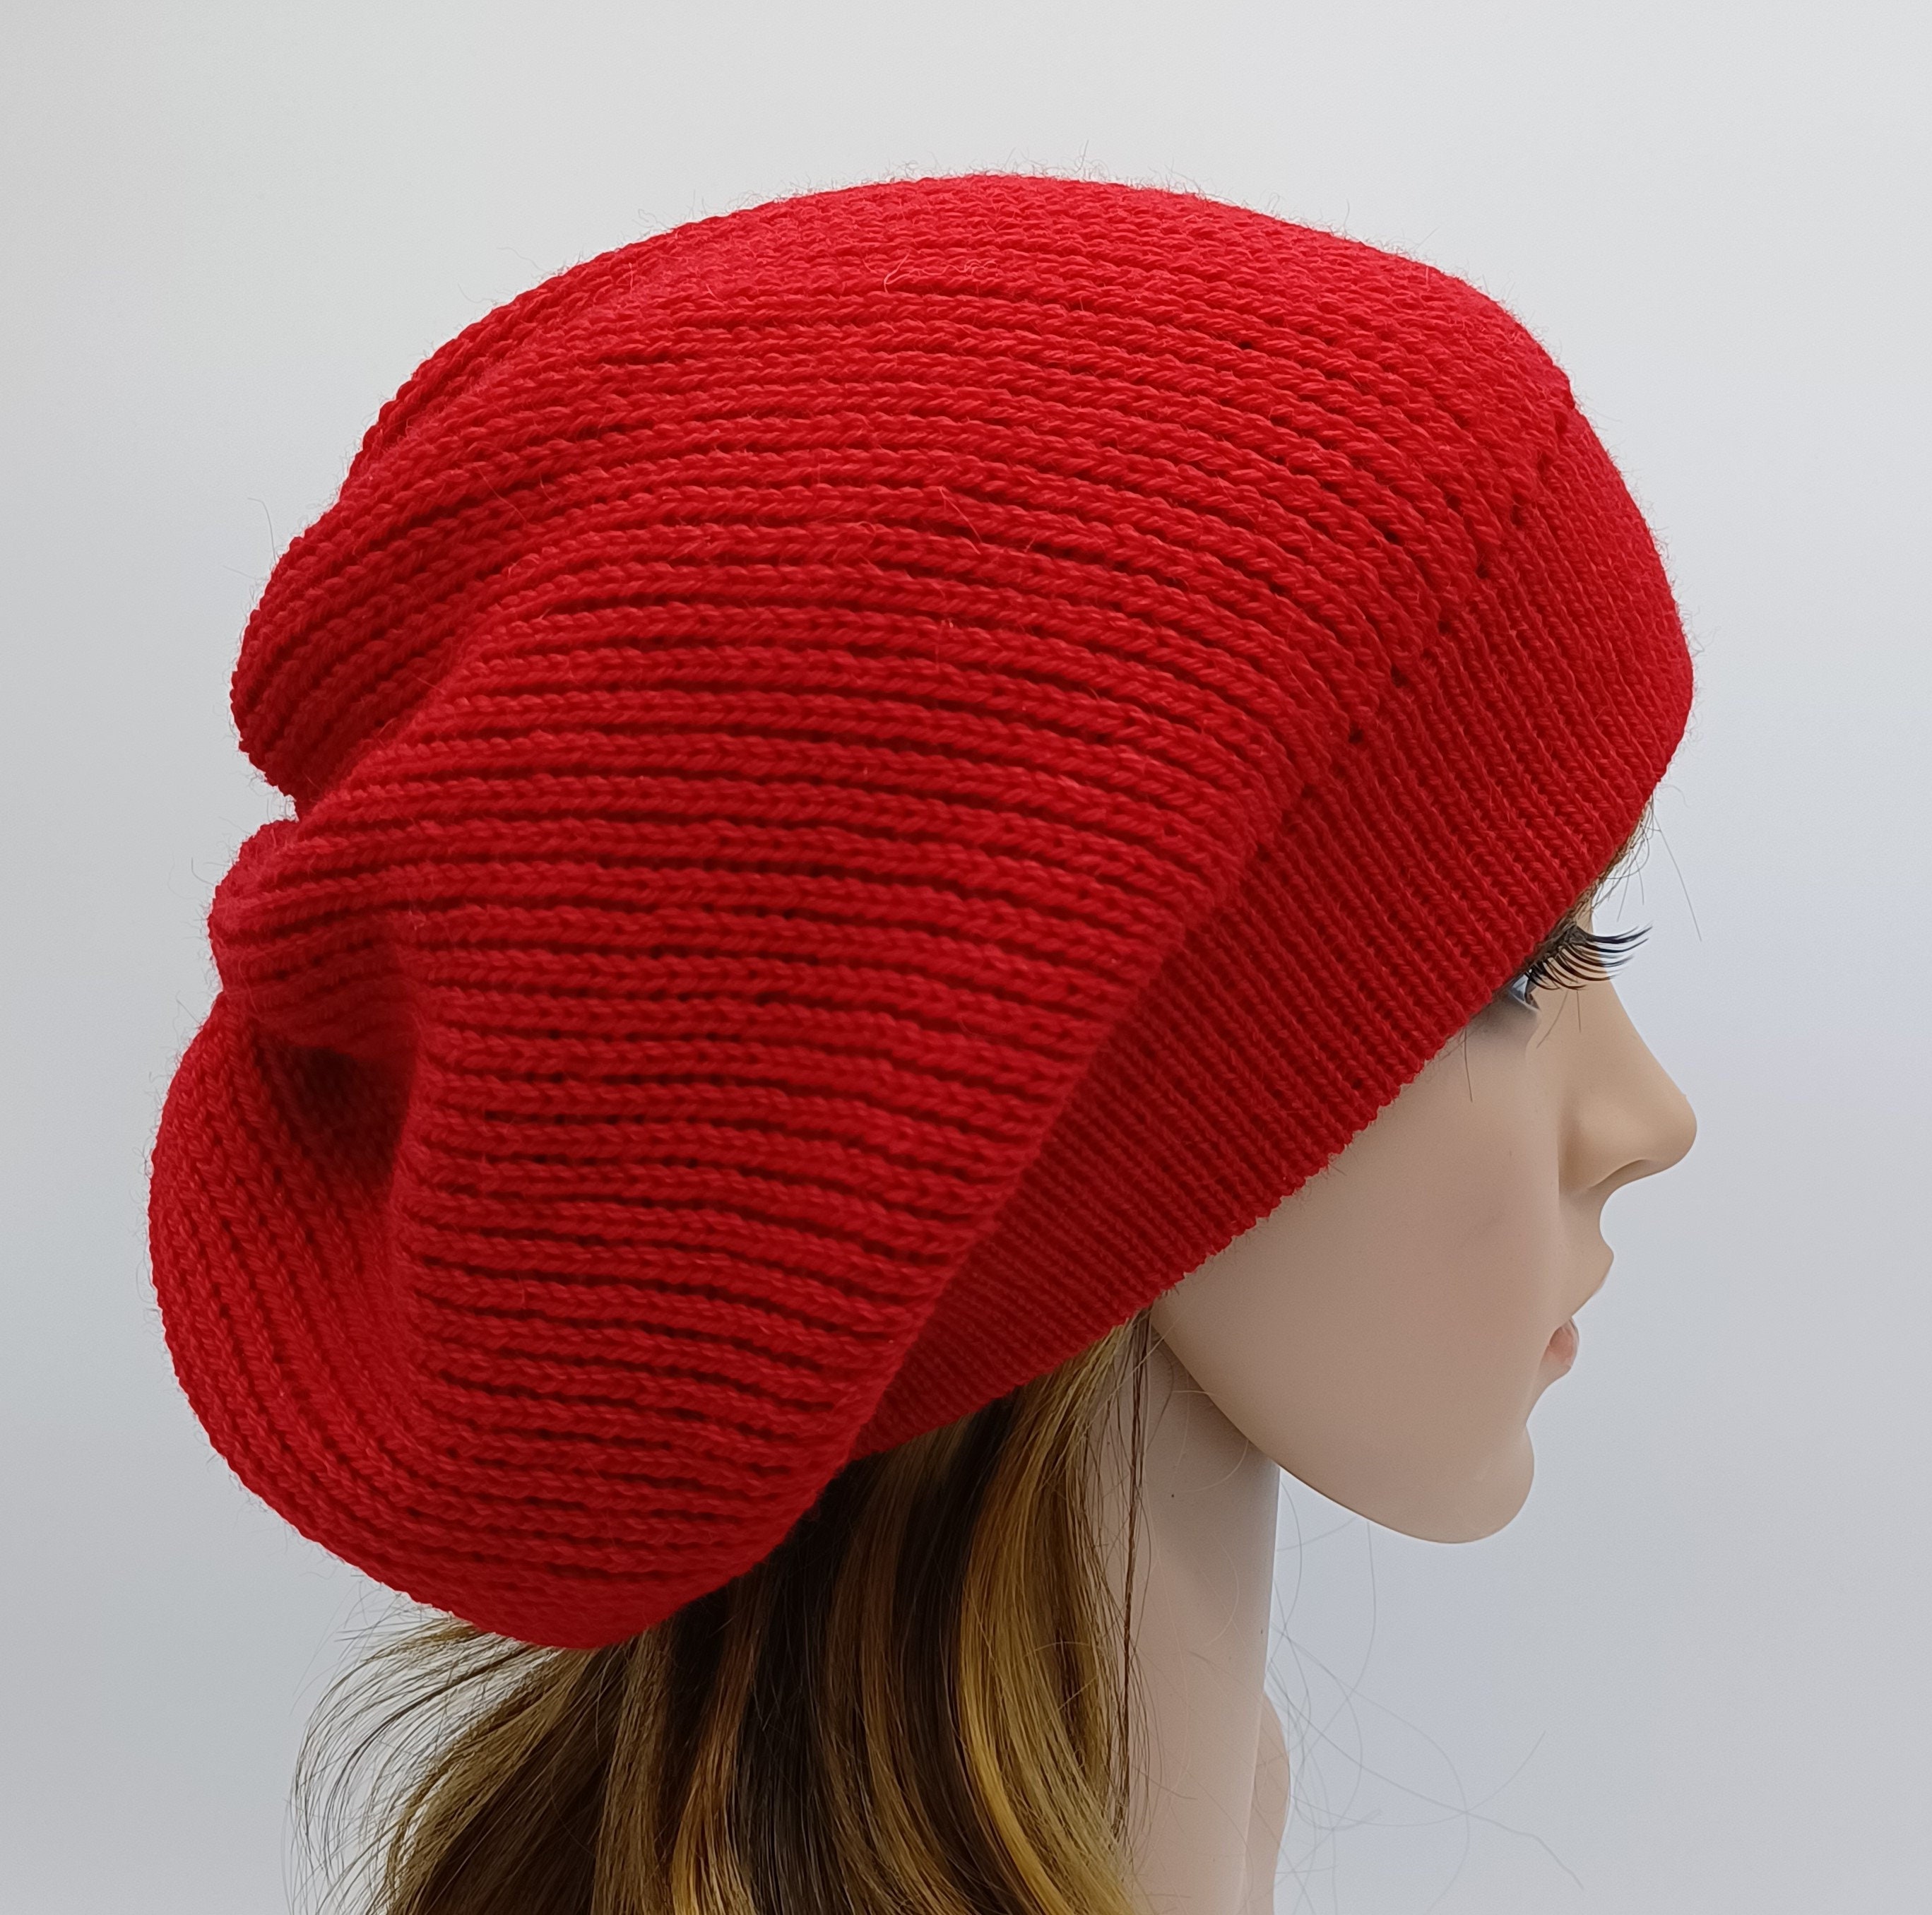 Handmade Red Alpaca Blend Fashion Baggy Beanie, Fall Hat, Knitted Slouch Beret, Stylish Tam